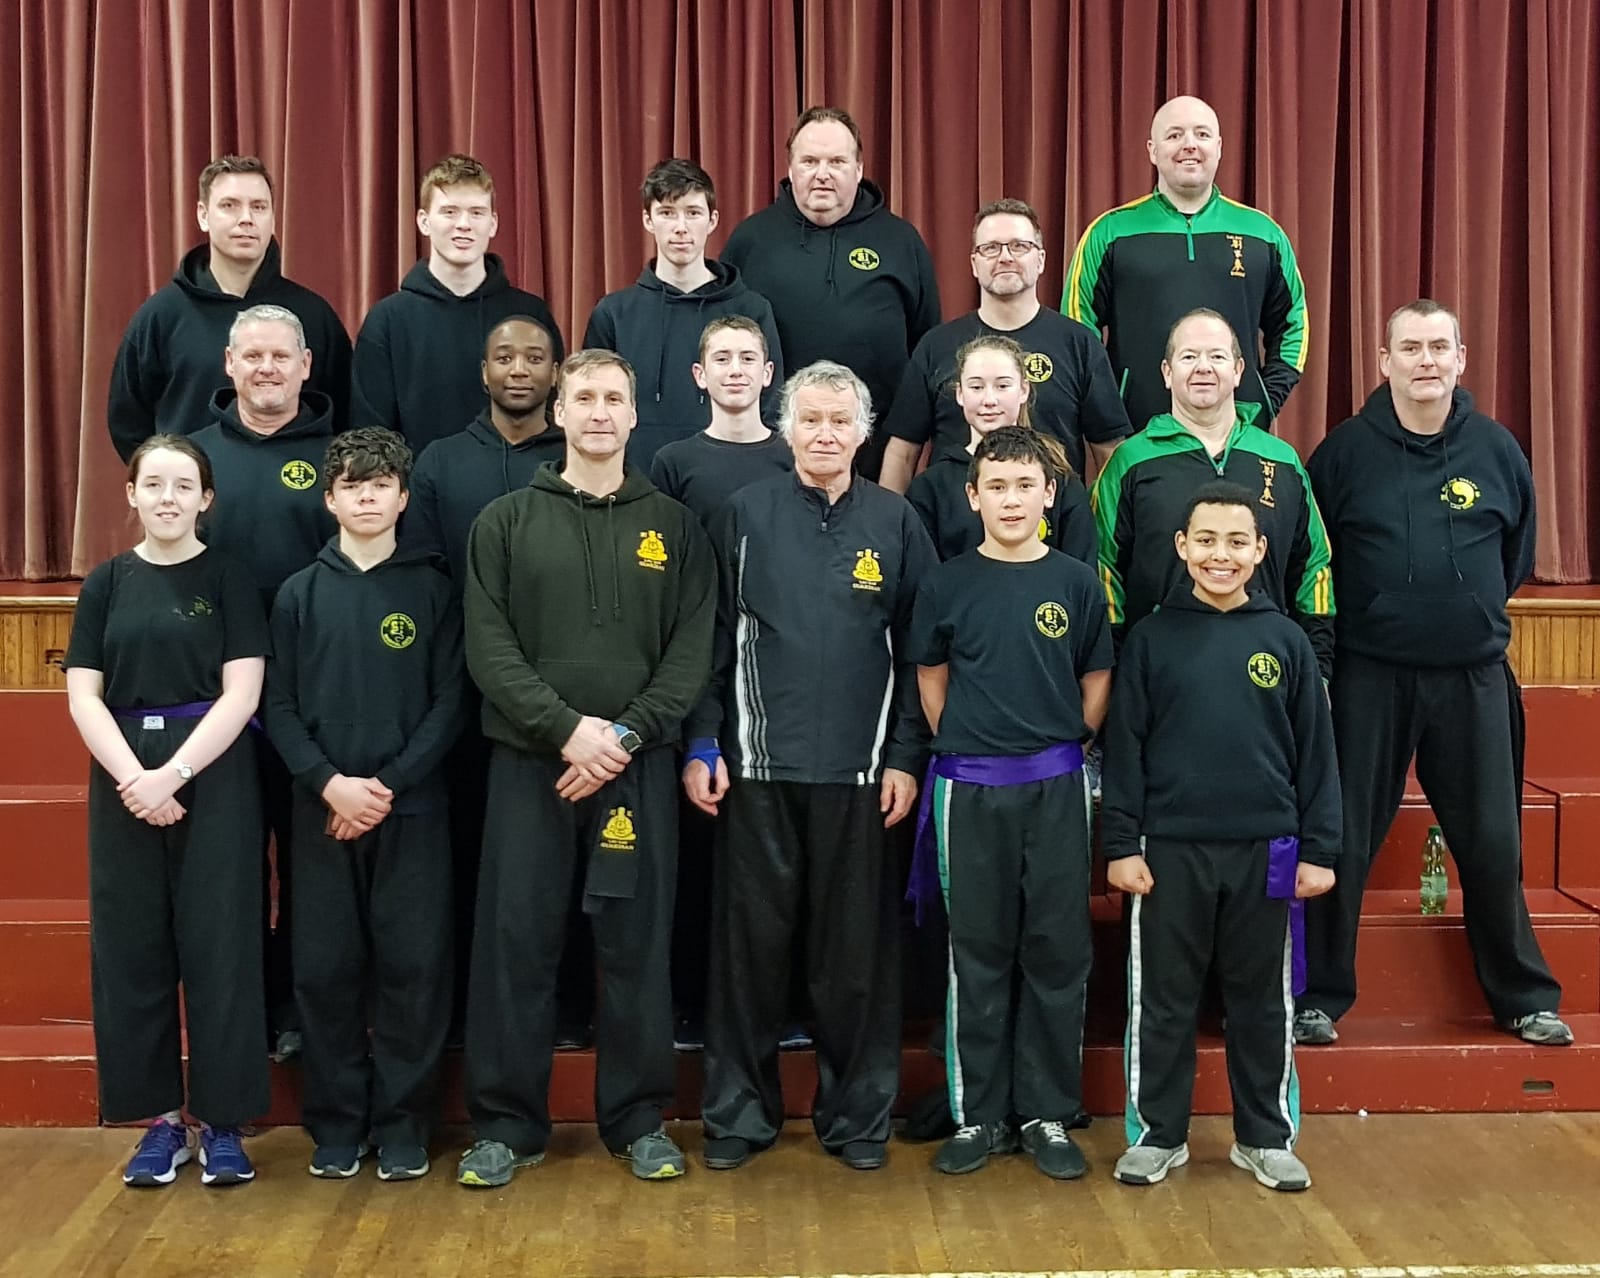 Group photo at day one of the recent Master John Russell Training Weekend